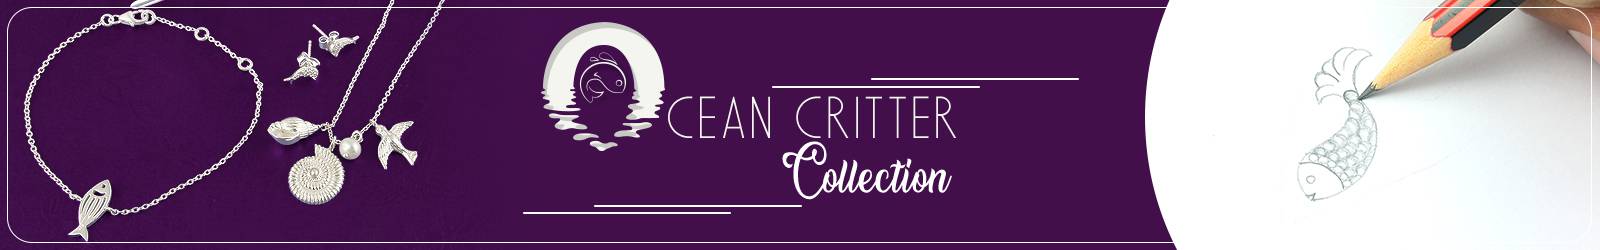 Wholesale Online Ocean Critter Jewelry Collection